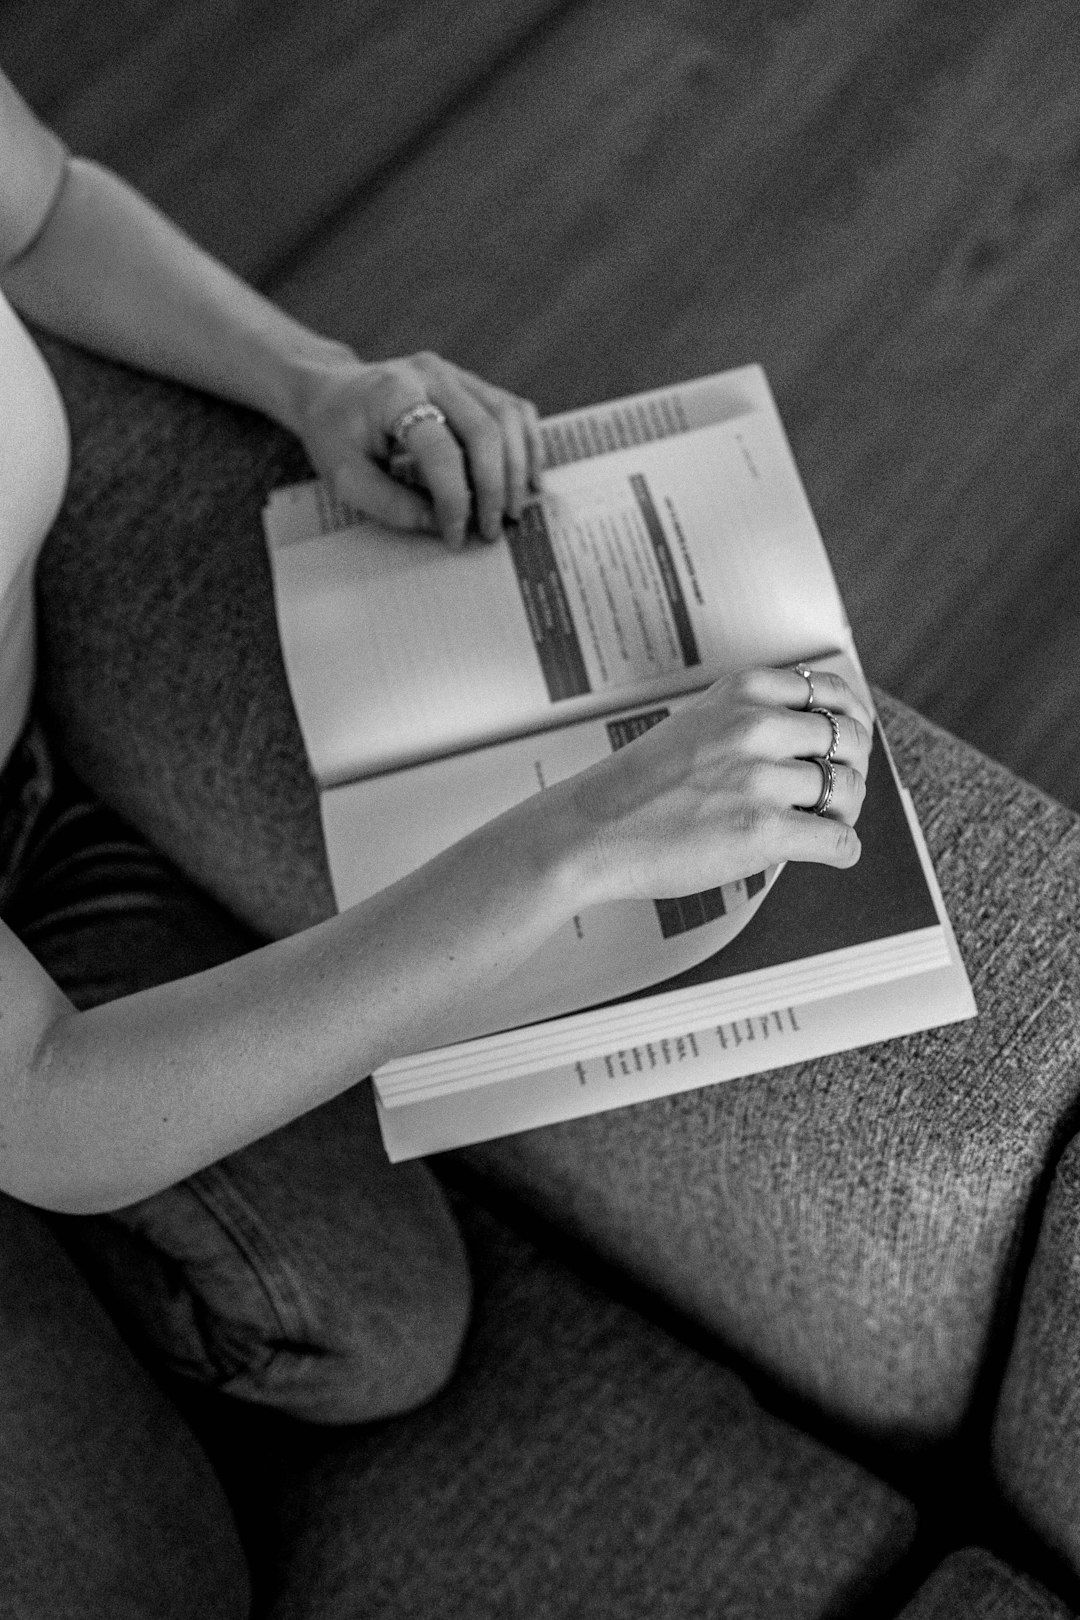 grayscale photo of person reading book